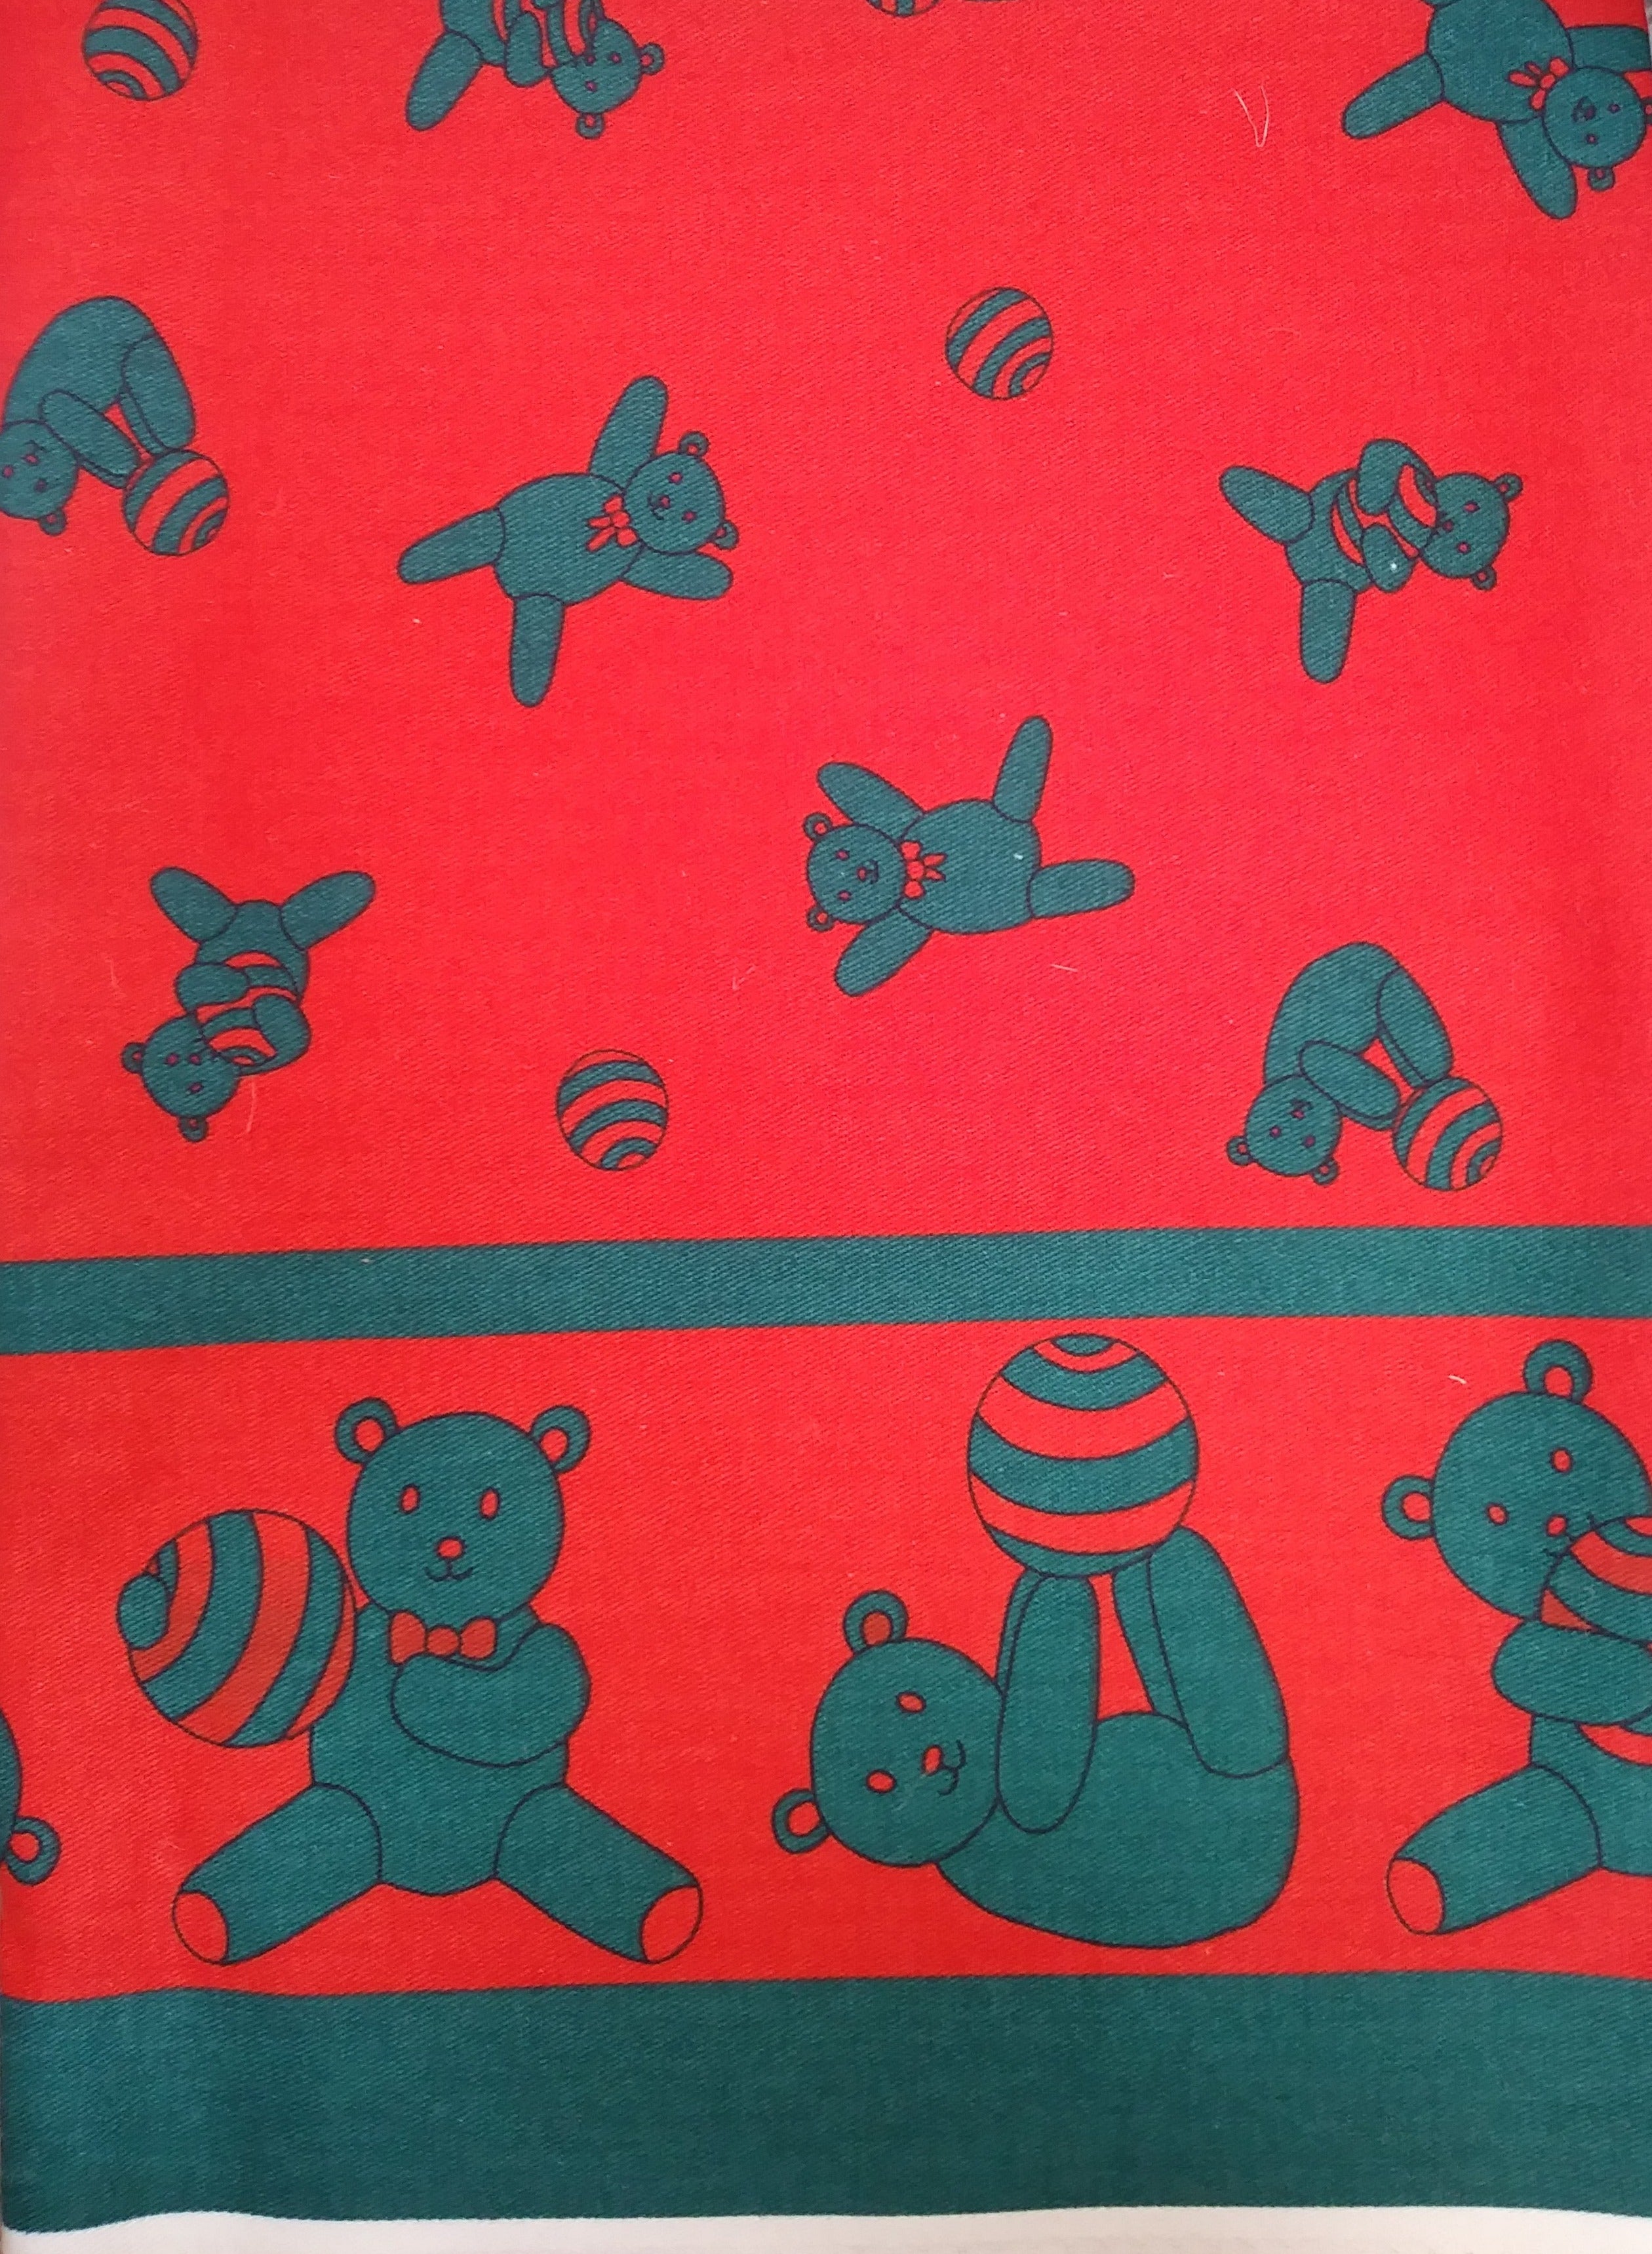 Remnant - 1m - Red/Green Teddy Fabric - Cotton Twill